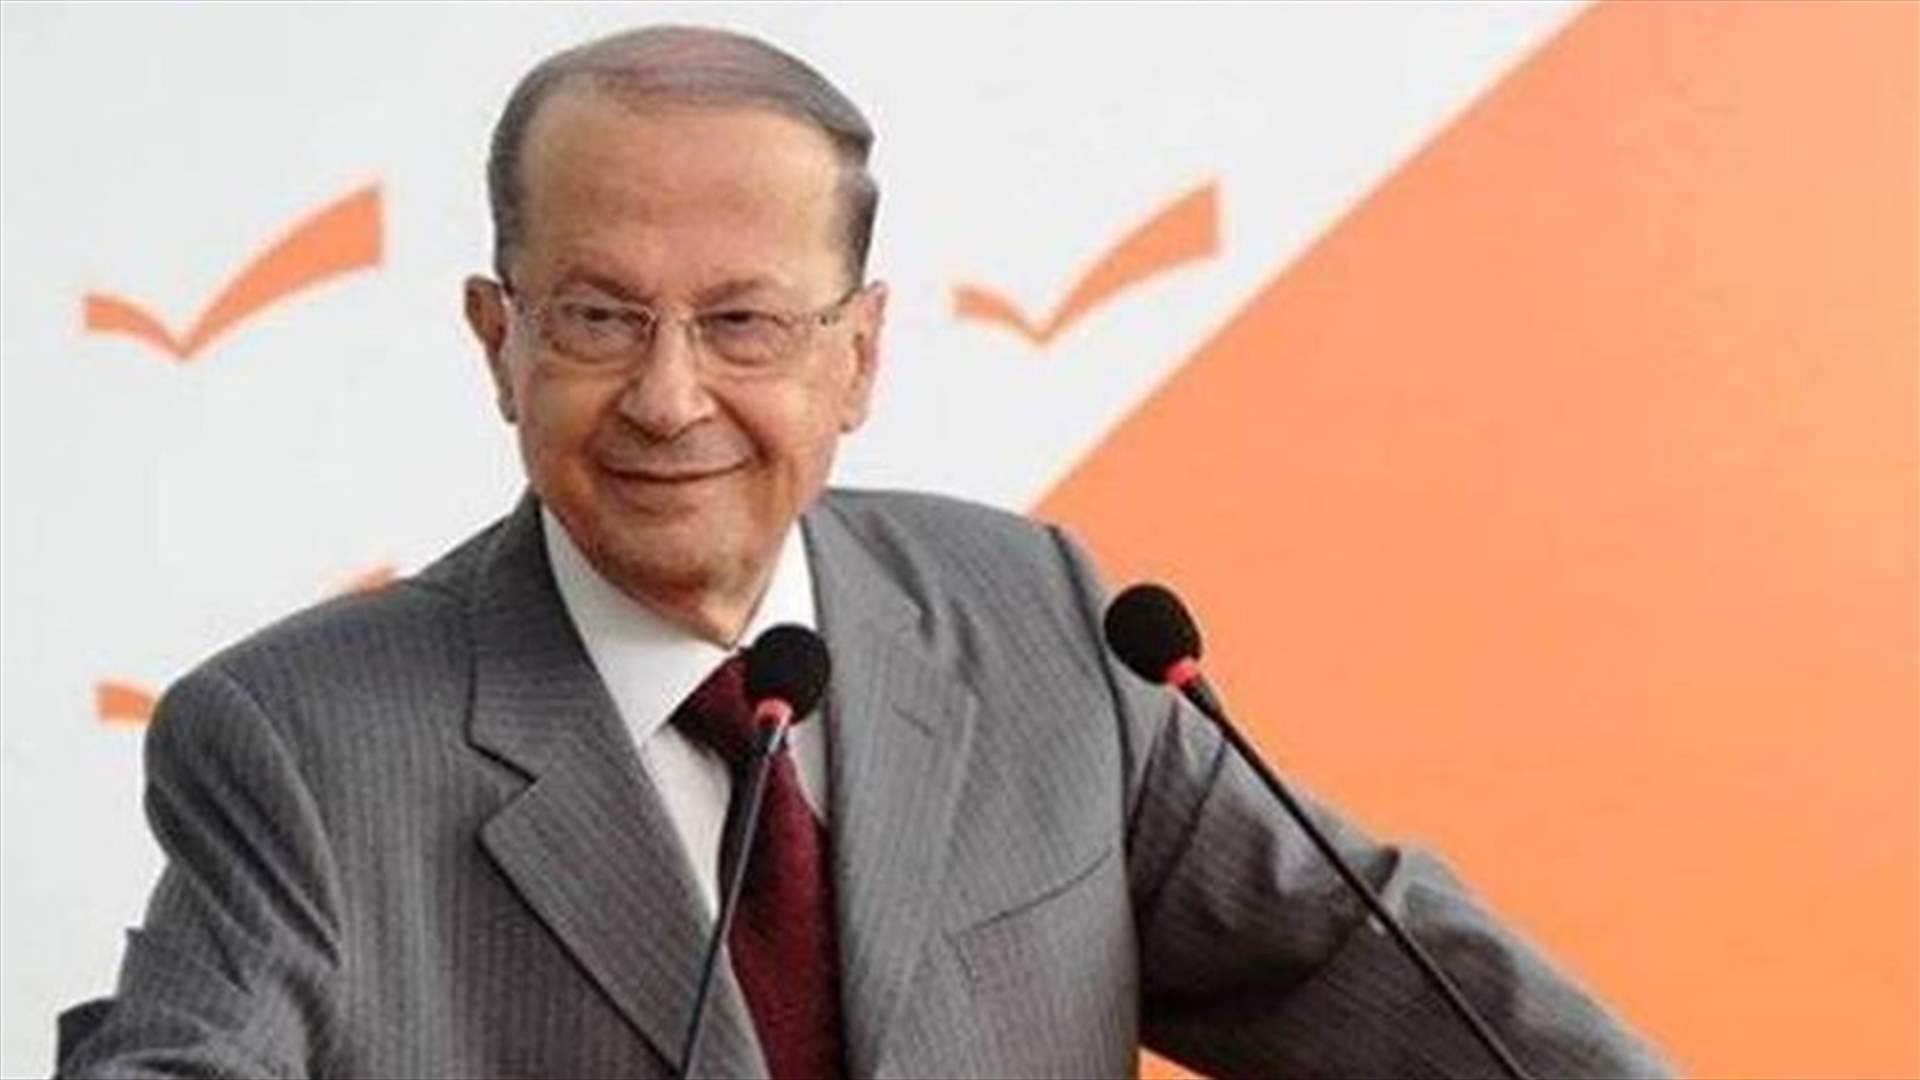  Aoun urges supporters to abide by laws during Oct 31 celebrations 